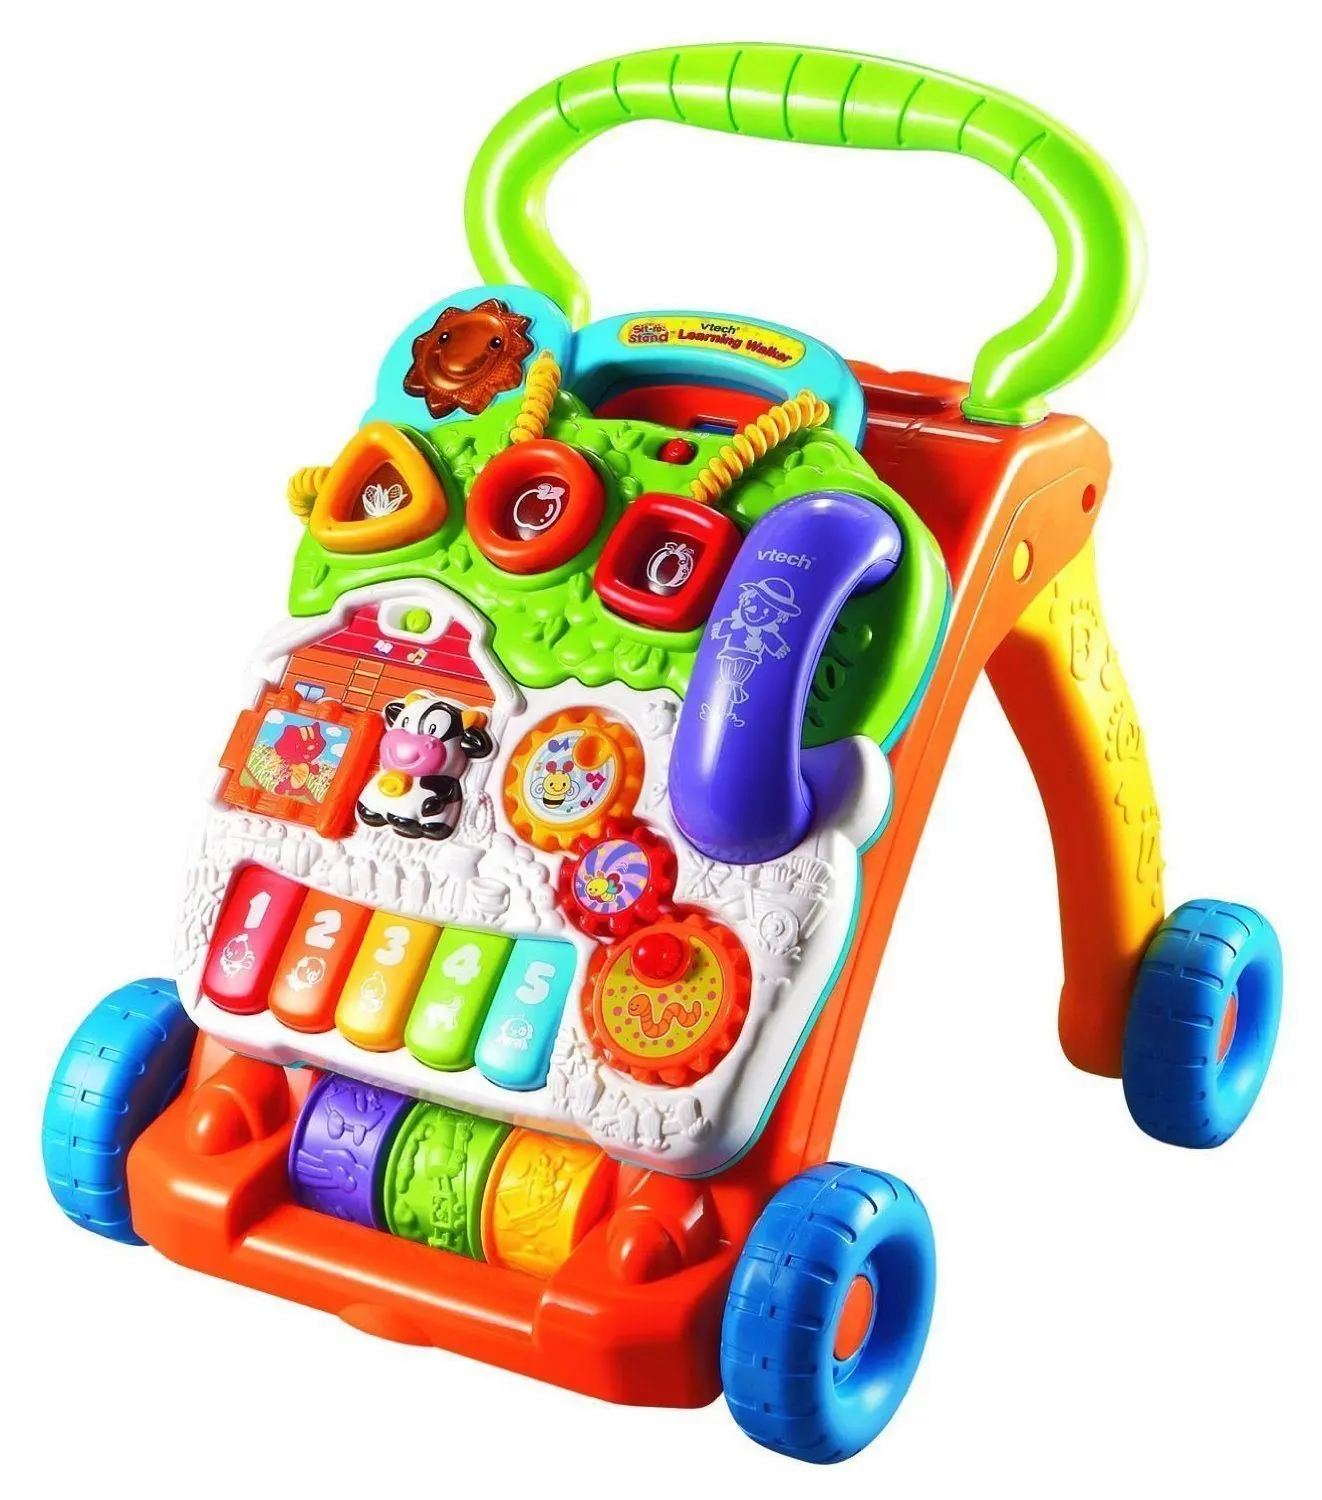 vtech sit to stand learning walker replacement phone